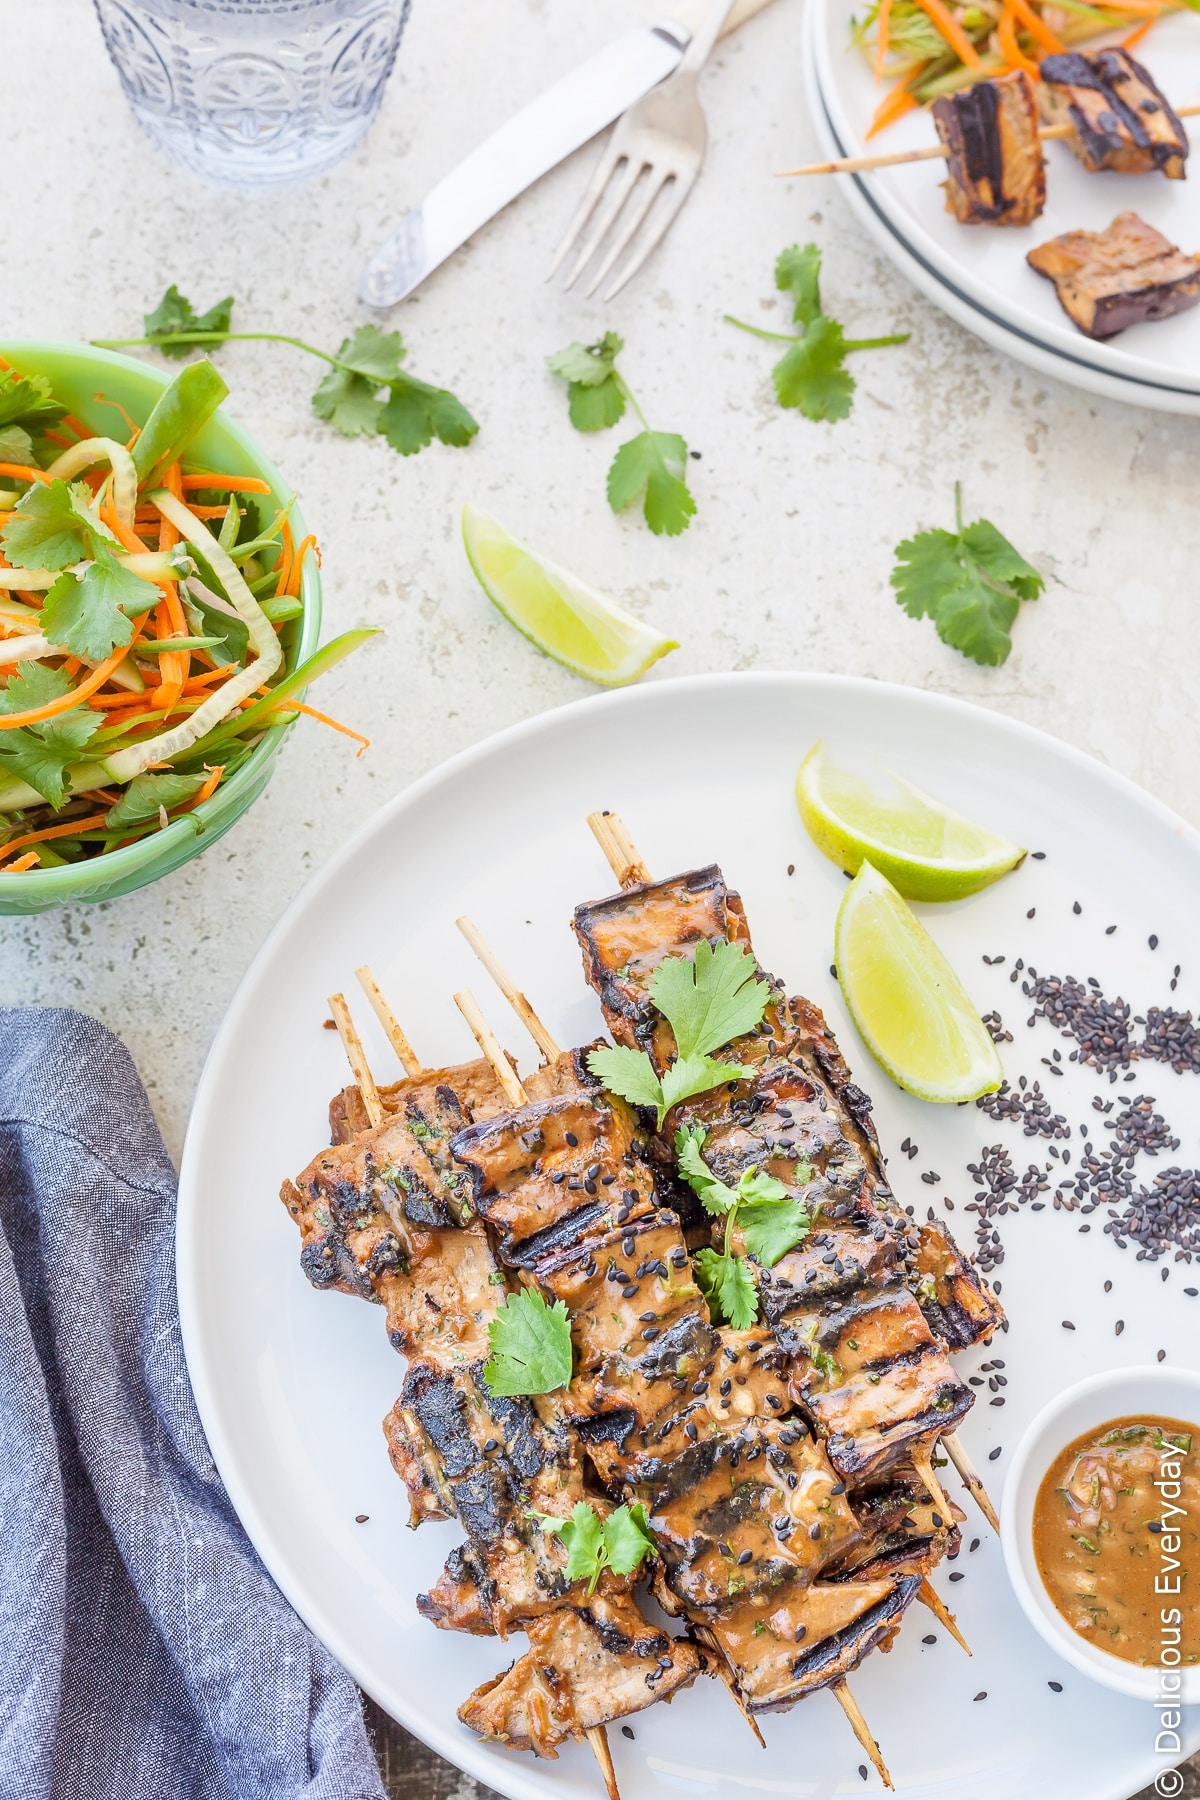 These Grilled Eggplant Kebabs are grilled until soft and lightly caramelised in a tahini satay marinade. A fun twist on the traditional satay recipes that is vegan, nut free & gluten free.